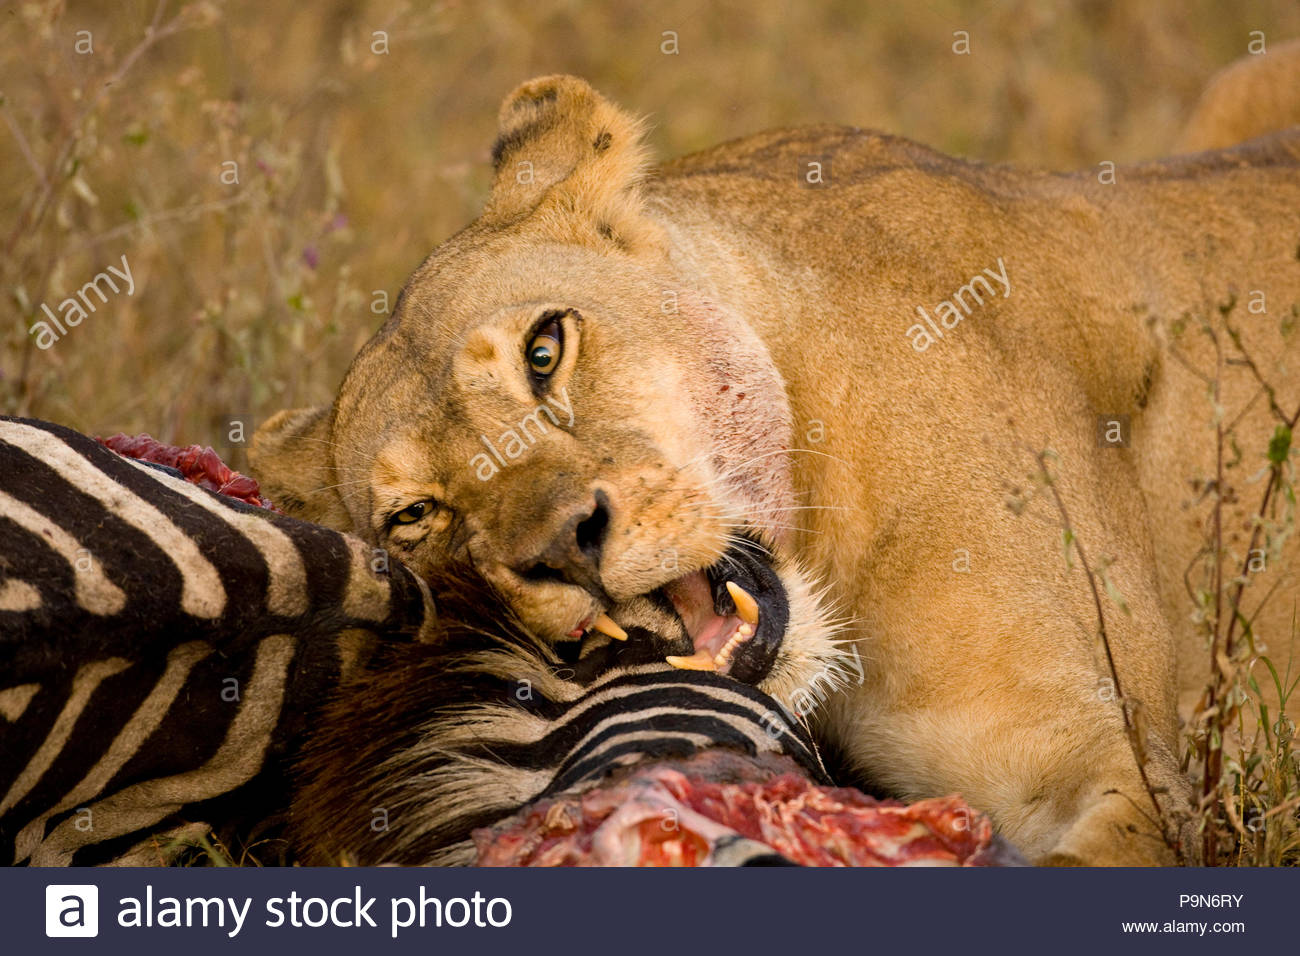 African lioness, Panthera leo, gnawing on a zebra carcass. Stock Photo